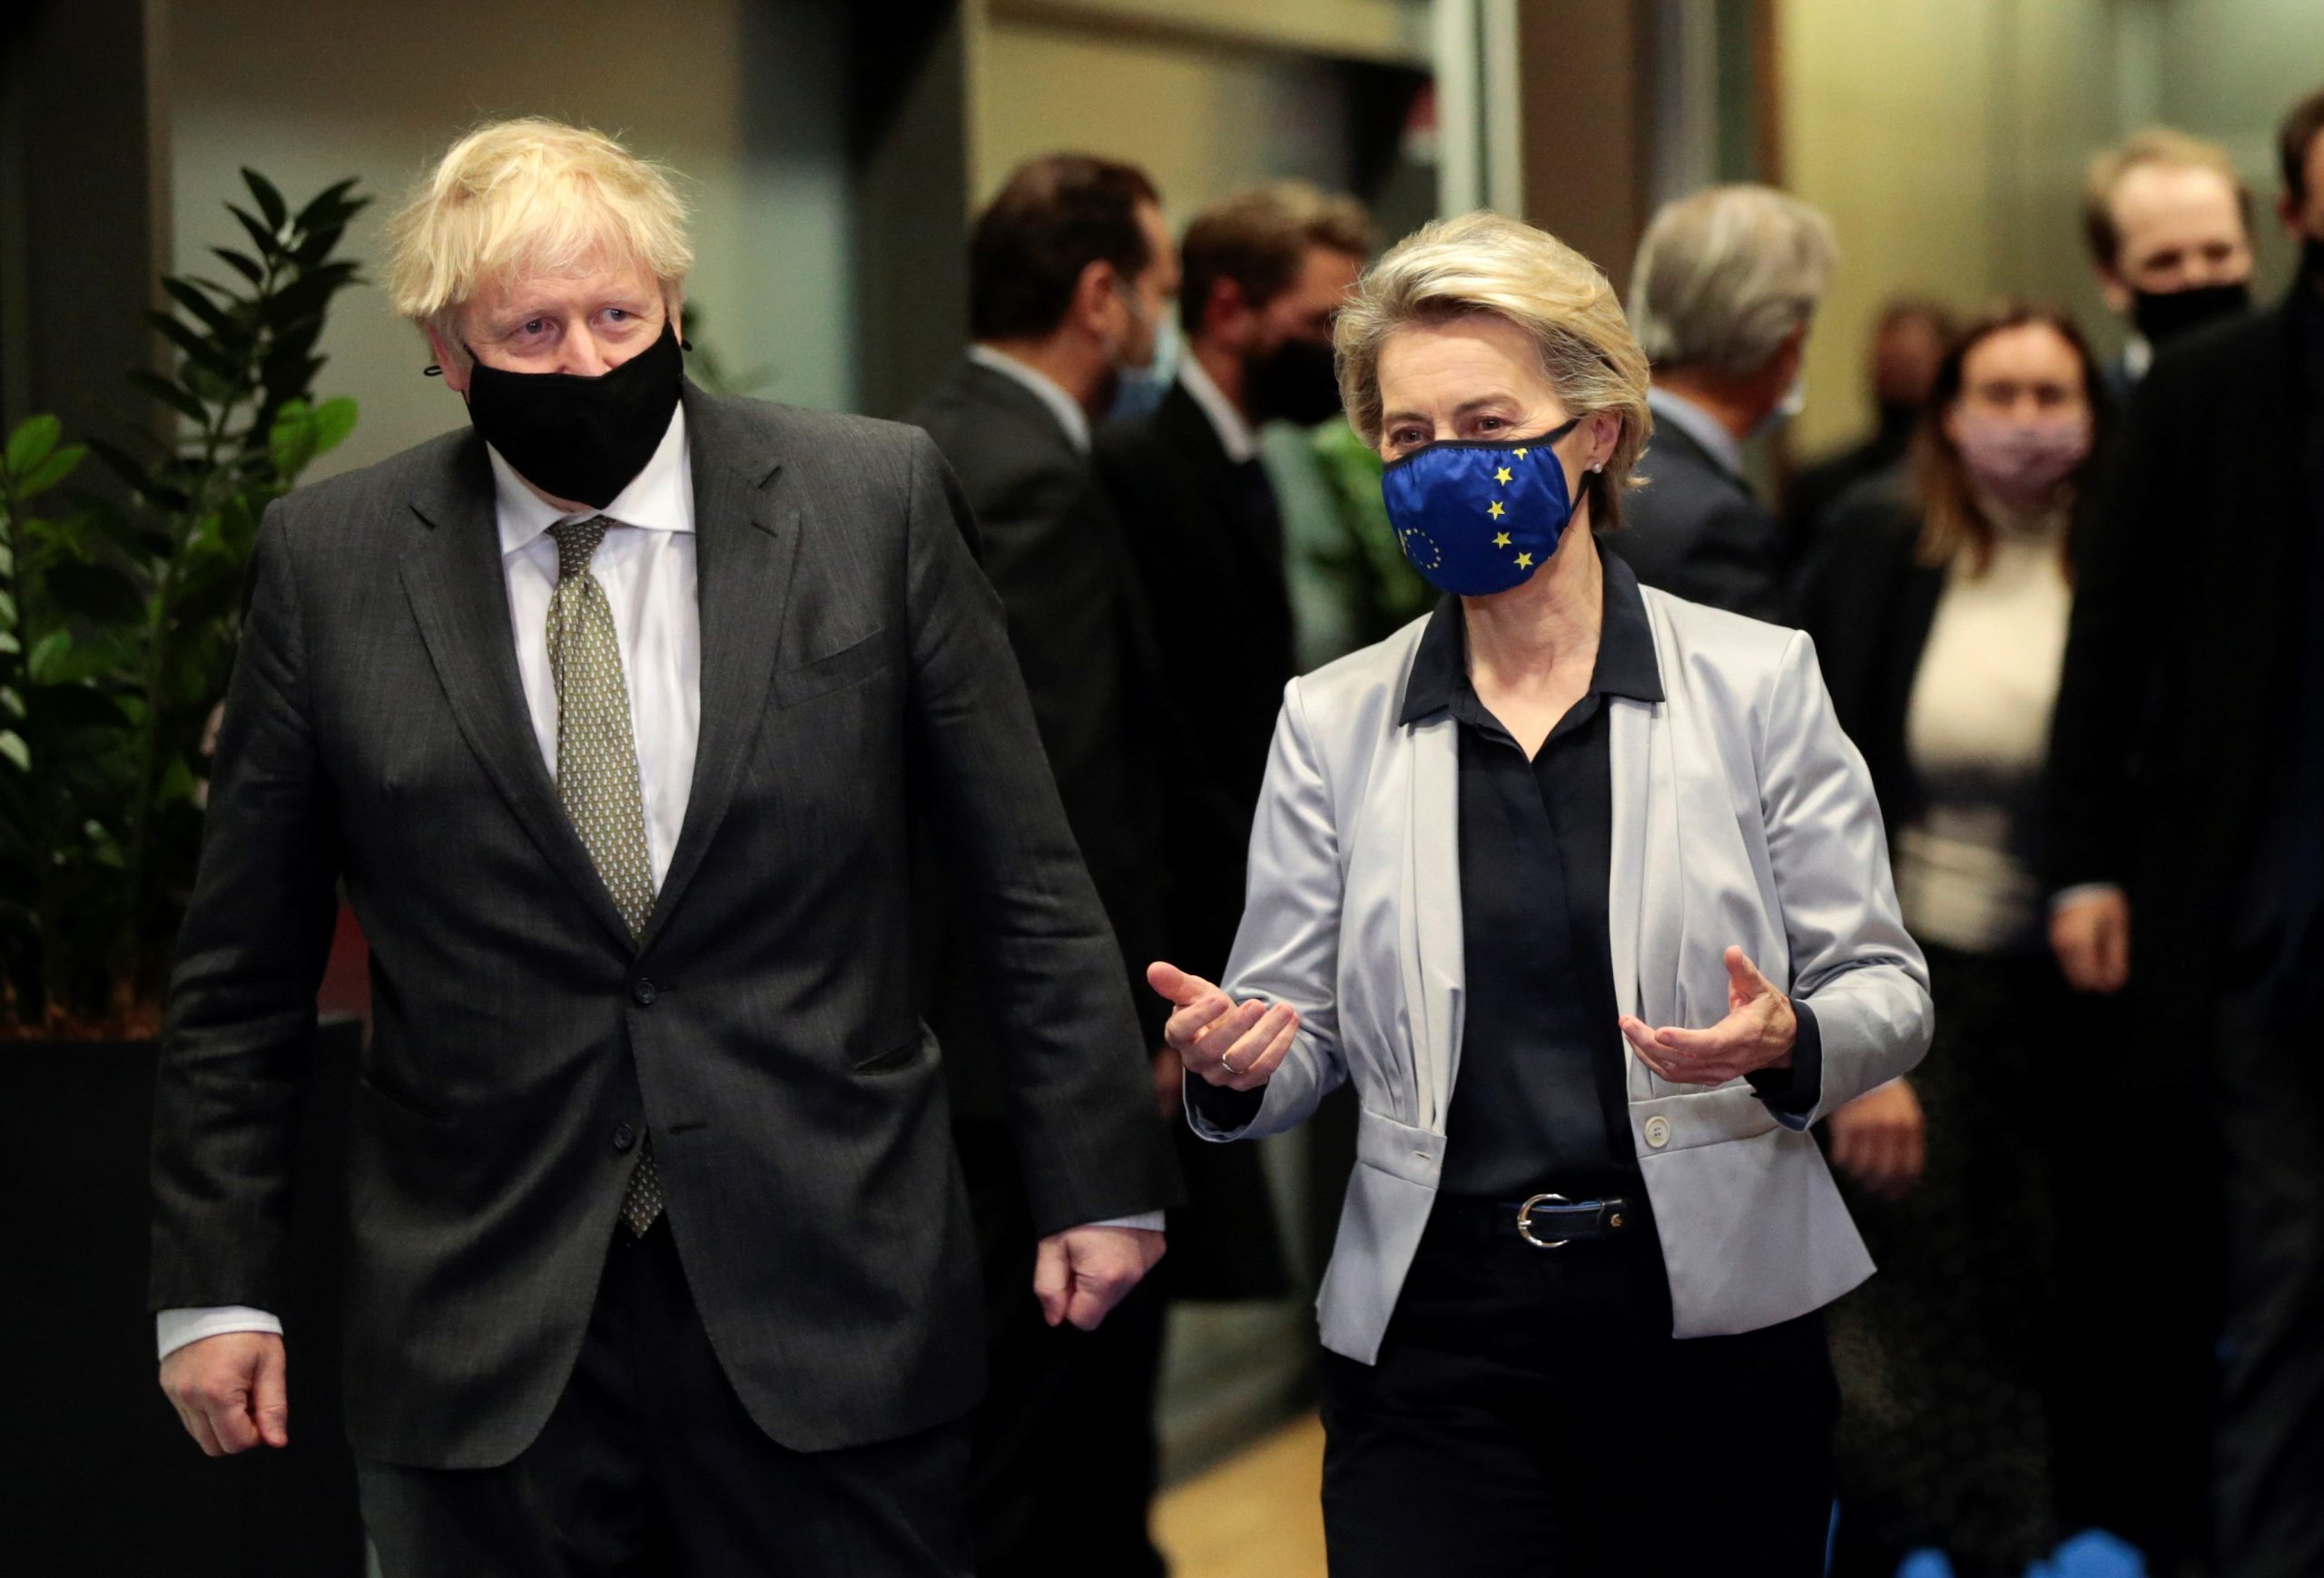 epa08873086 Britain's Prime Minister Boris Johnson (L) is welcomed by European Commission President Ursula von der Leyen (R) prior to  post-Brexit trade deal talks, in Brussels, Belgium, 09 December 2020. A negotiations phase of eleven months that started on 31 January 2020 following the UK's exit from the EU ends on 31 December 2020.  EPA/OLIVIER HOSLET / POOL